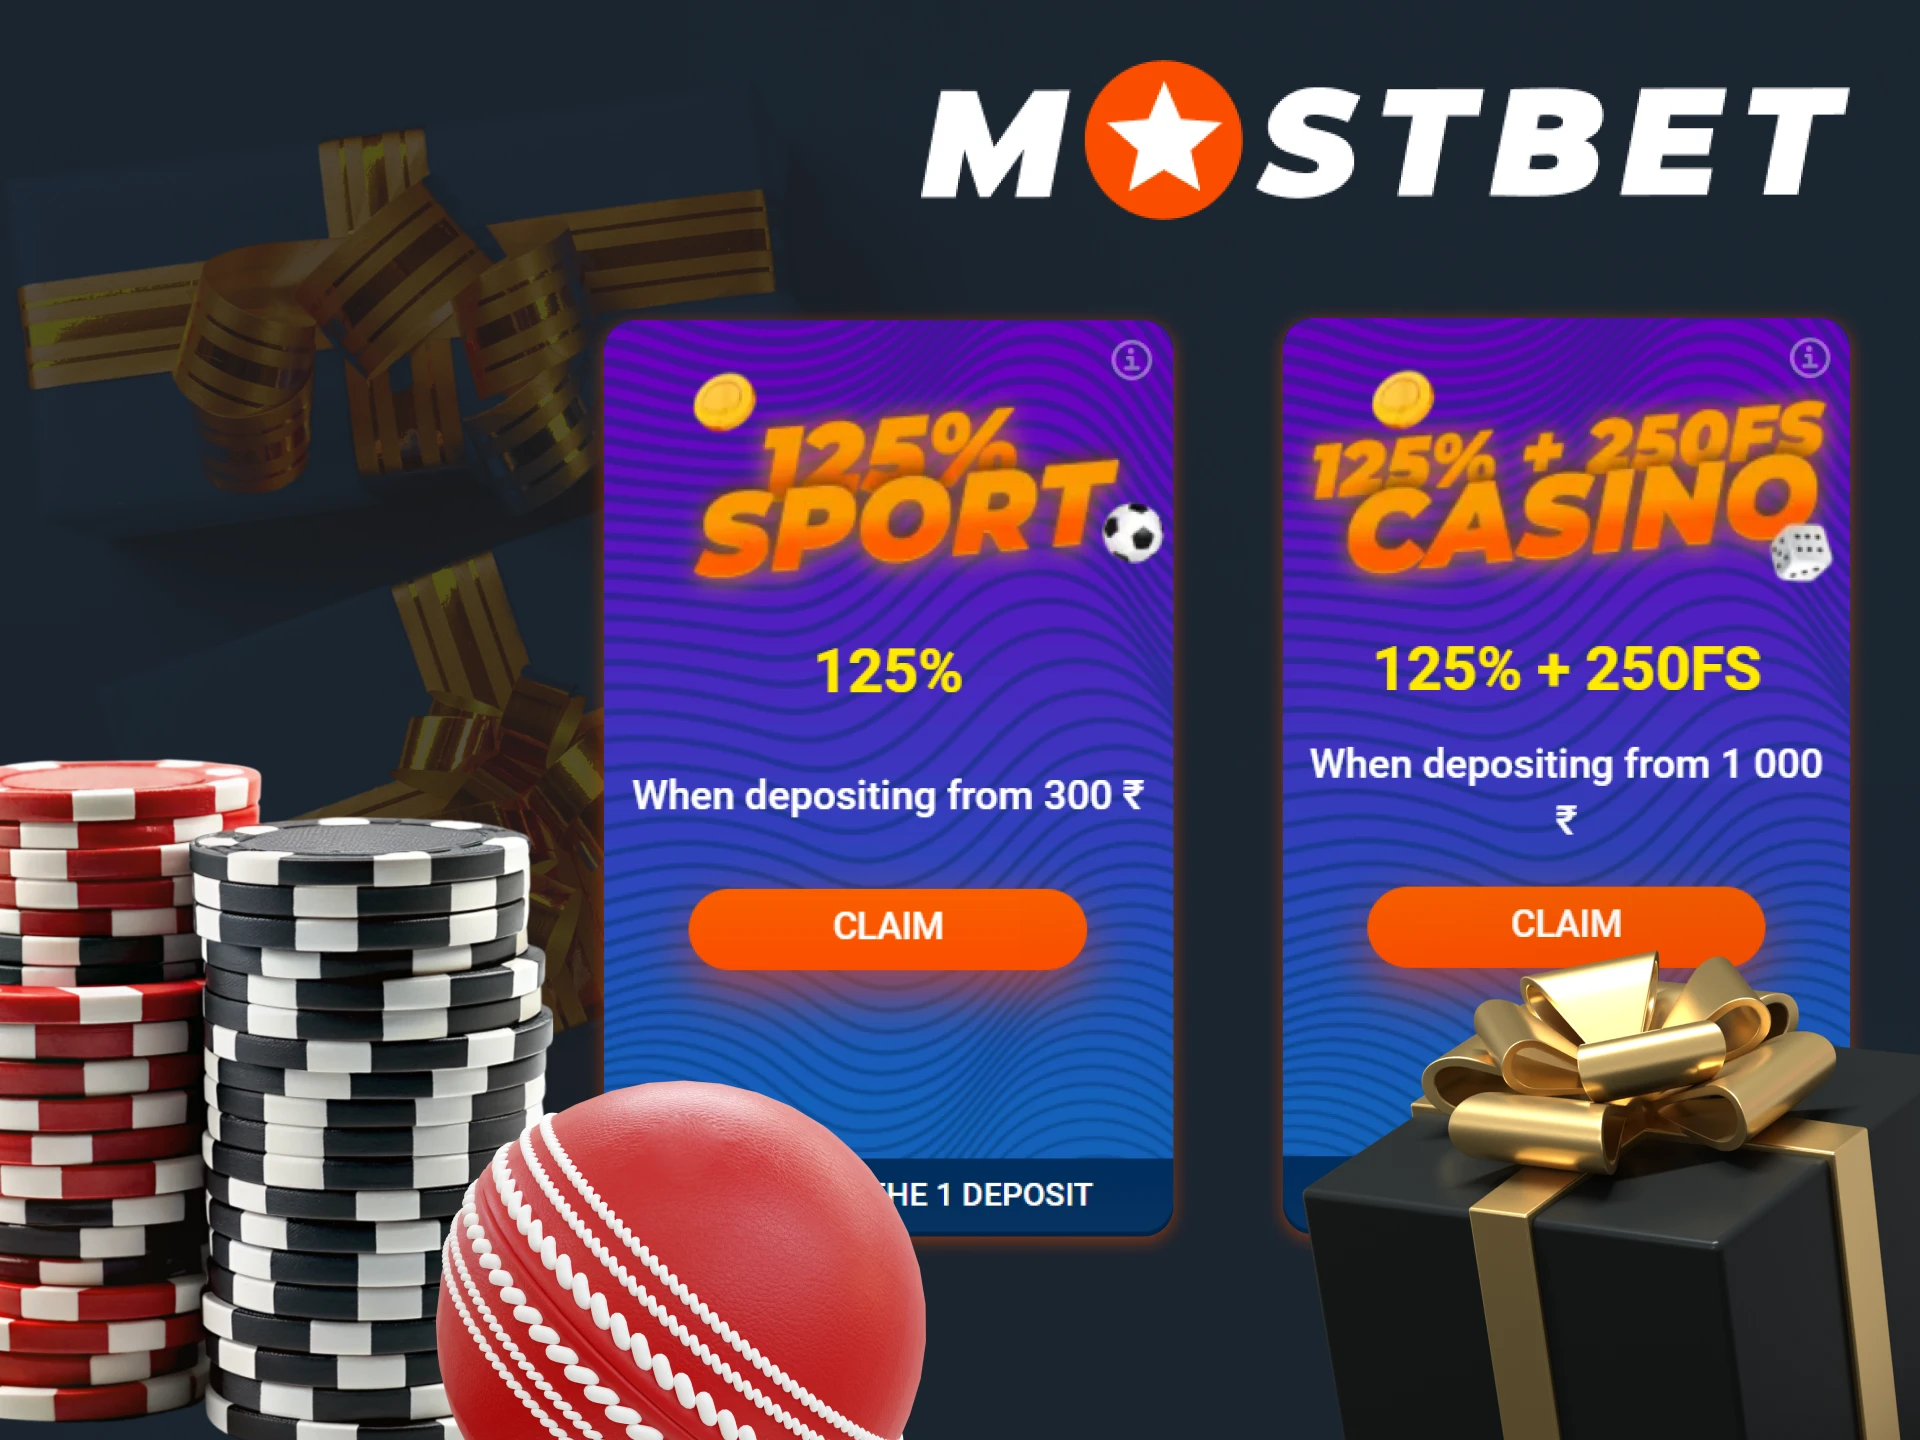 Mostbet offers the most lucrative welcome bonuses among many casinos.